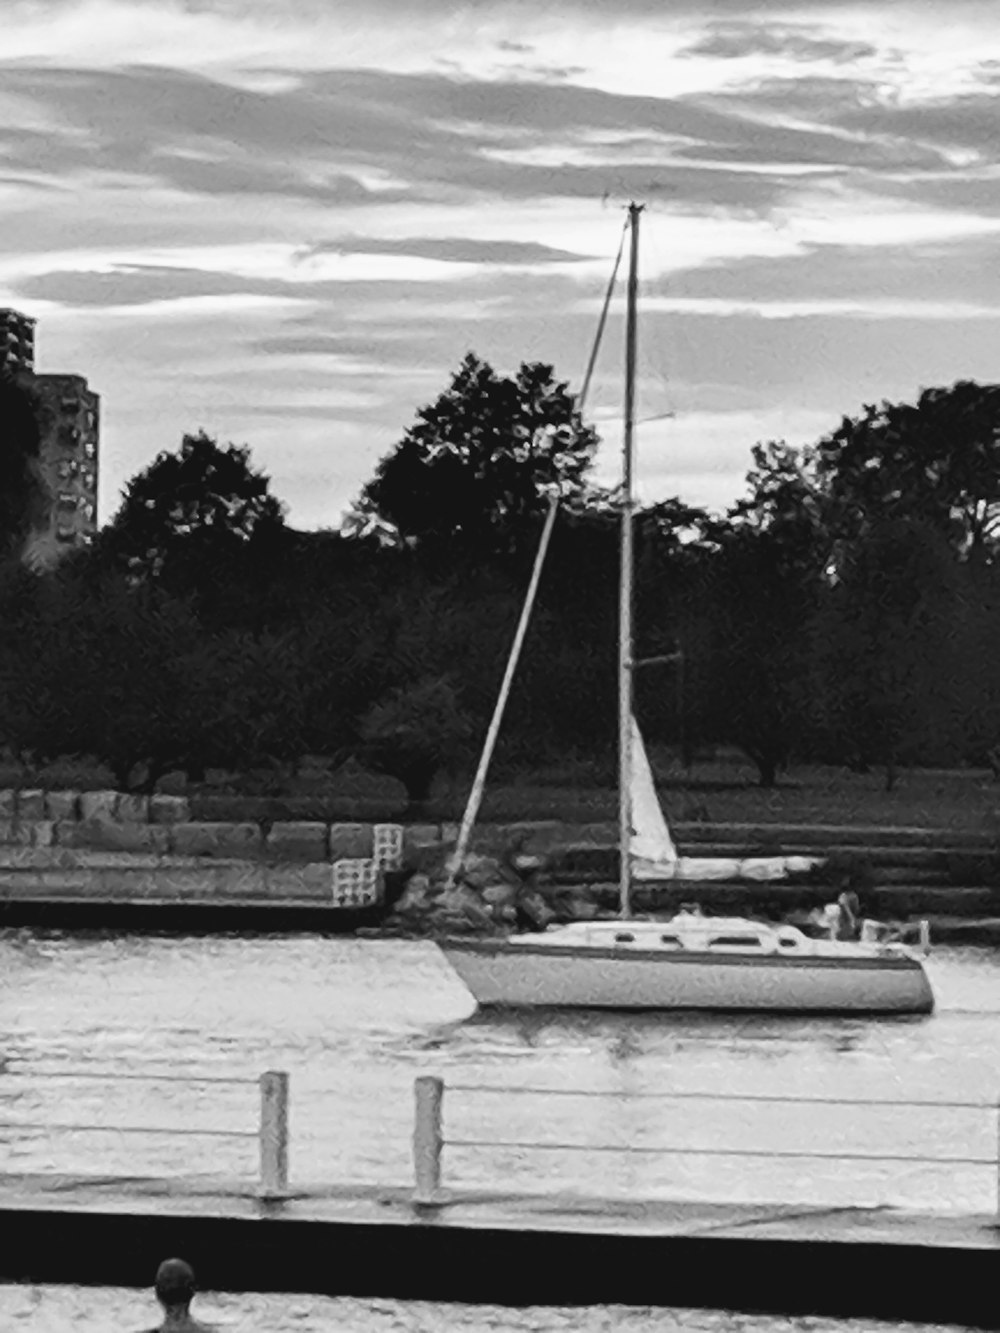 grayscale photo of sailboat on dock